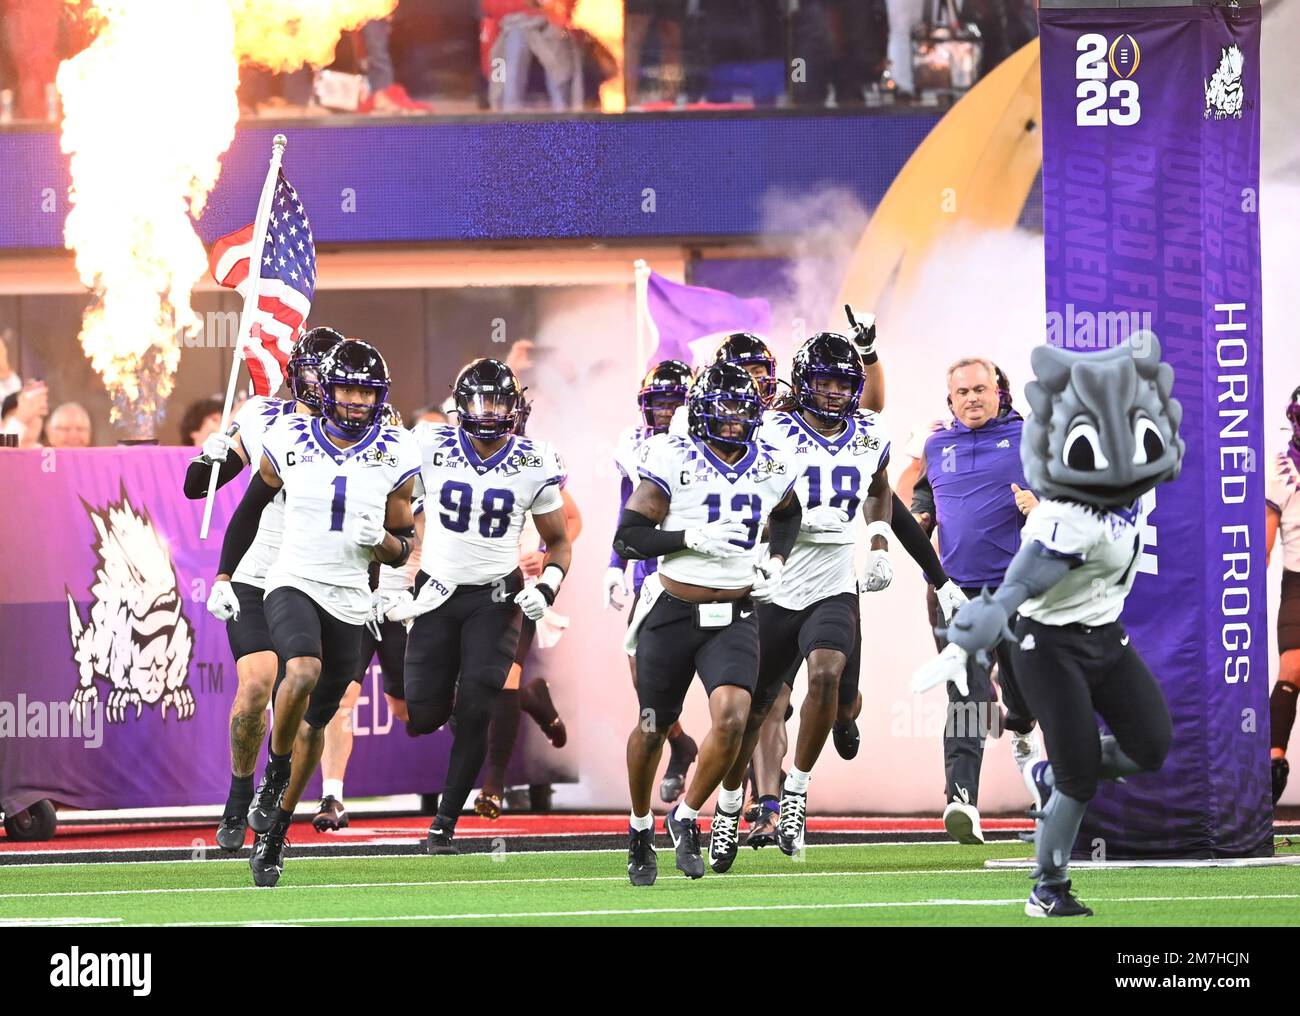 Inglewood, United States. 09th Jan, 2023. The TCU Horned Frogs take the field before the game at the 2023 NCAA College Football National Championship between Georgia and TCU at SoFi Stadium in Inglewood, California, on Monday, January 9, 2023. Photo by Mike Goulding/UPI Credit: UPI/Alamy Live News Stock Photo